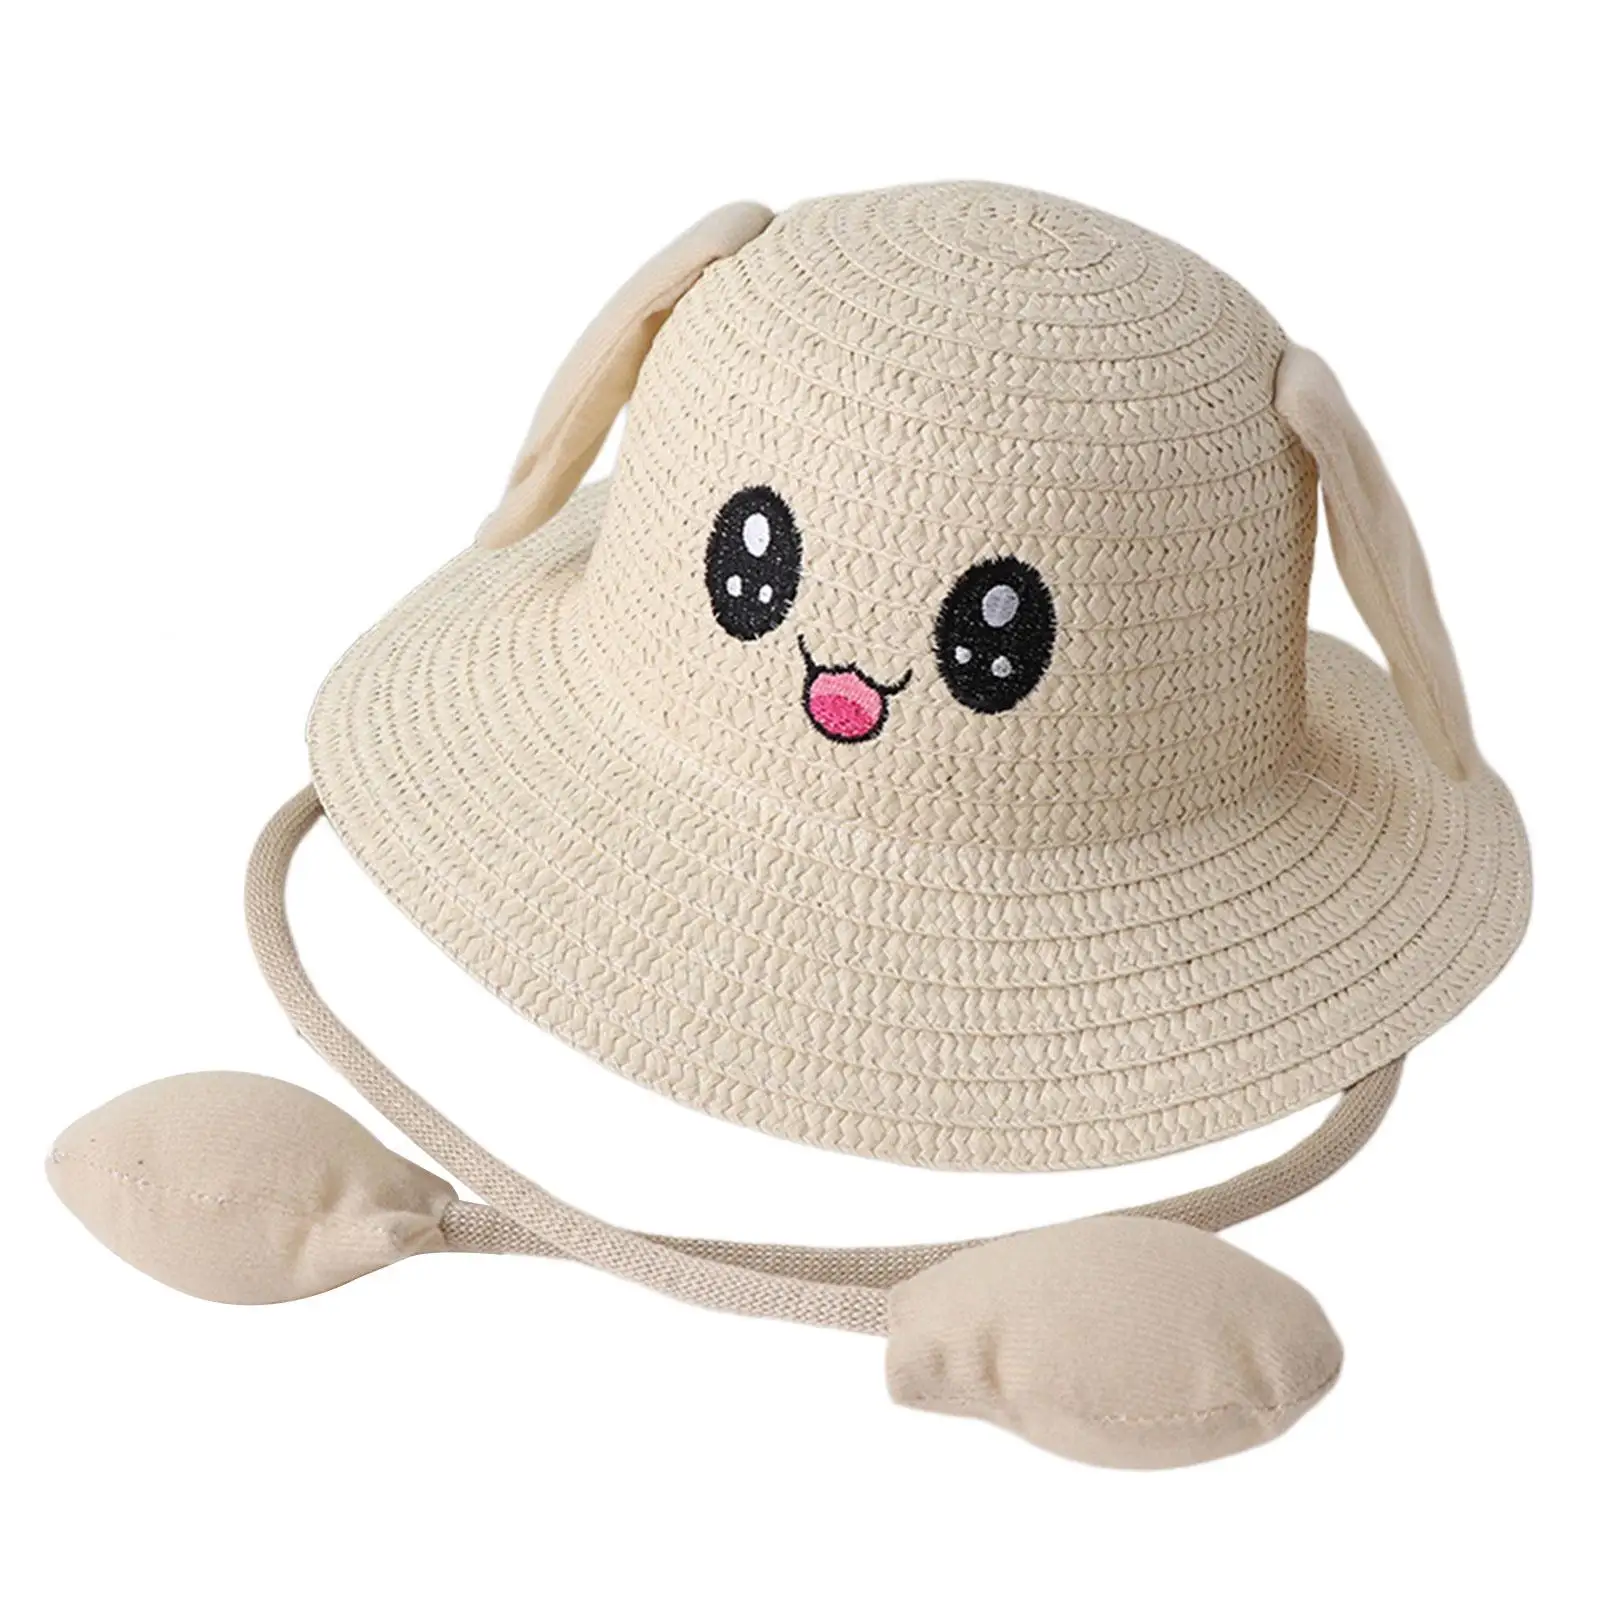 

Bunny Straw Hat Caps with Ears Moving Trendy Cotton Beach Hats Casual Sunscreen Hat for Holidays Travel Commuting Dress up Gift